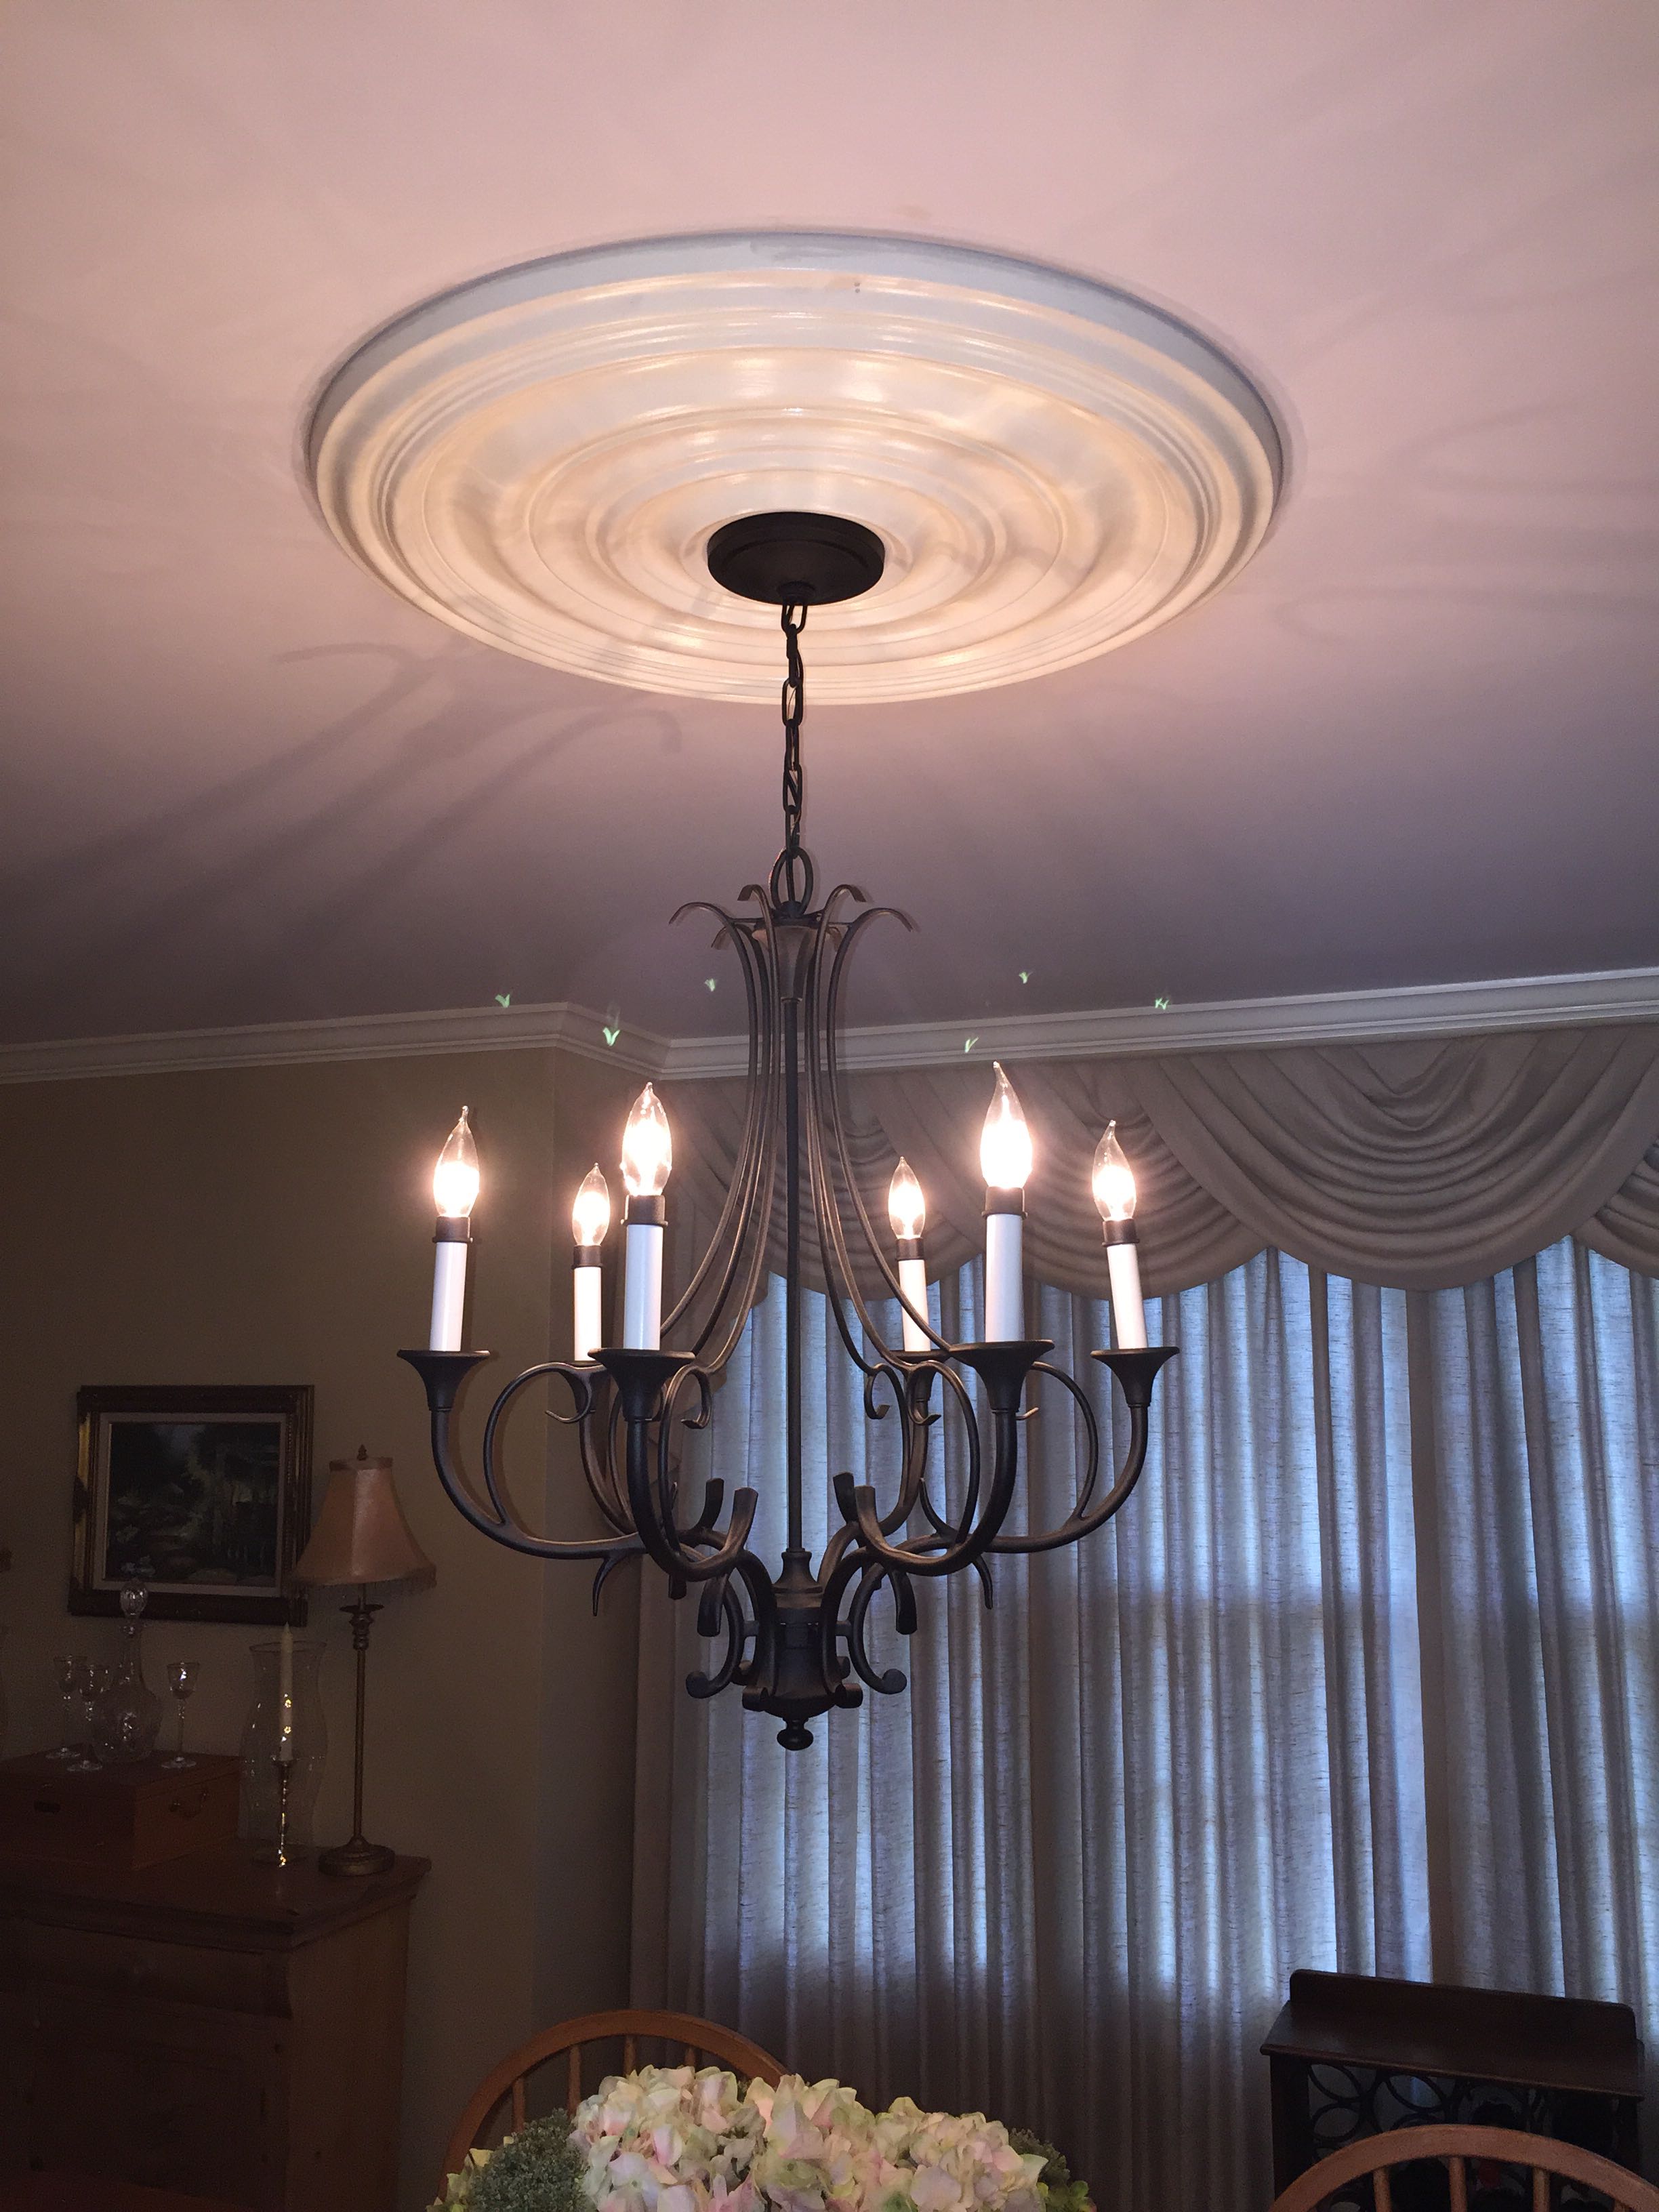 How To Choose Ceiling Medallions, How To Install Ceiling Medallion With Chandelier